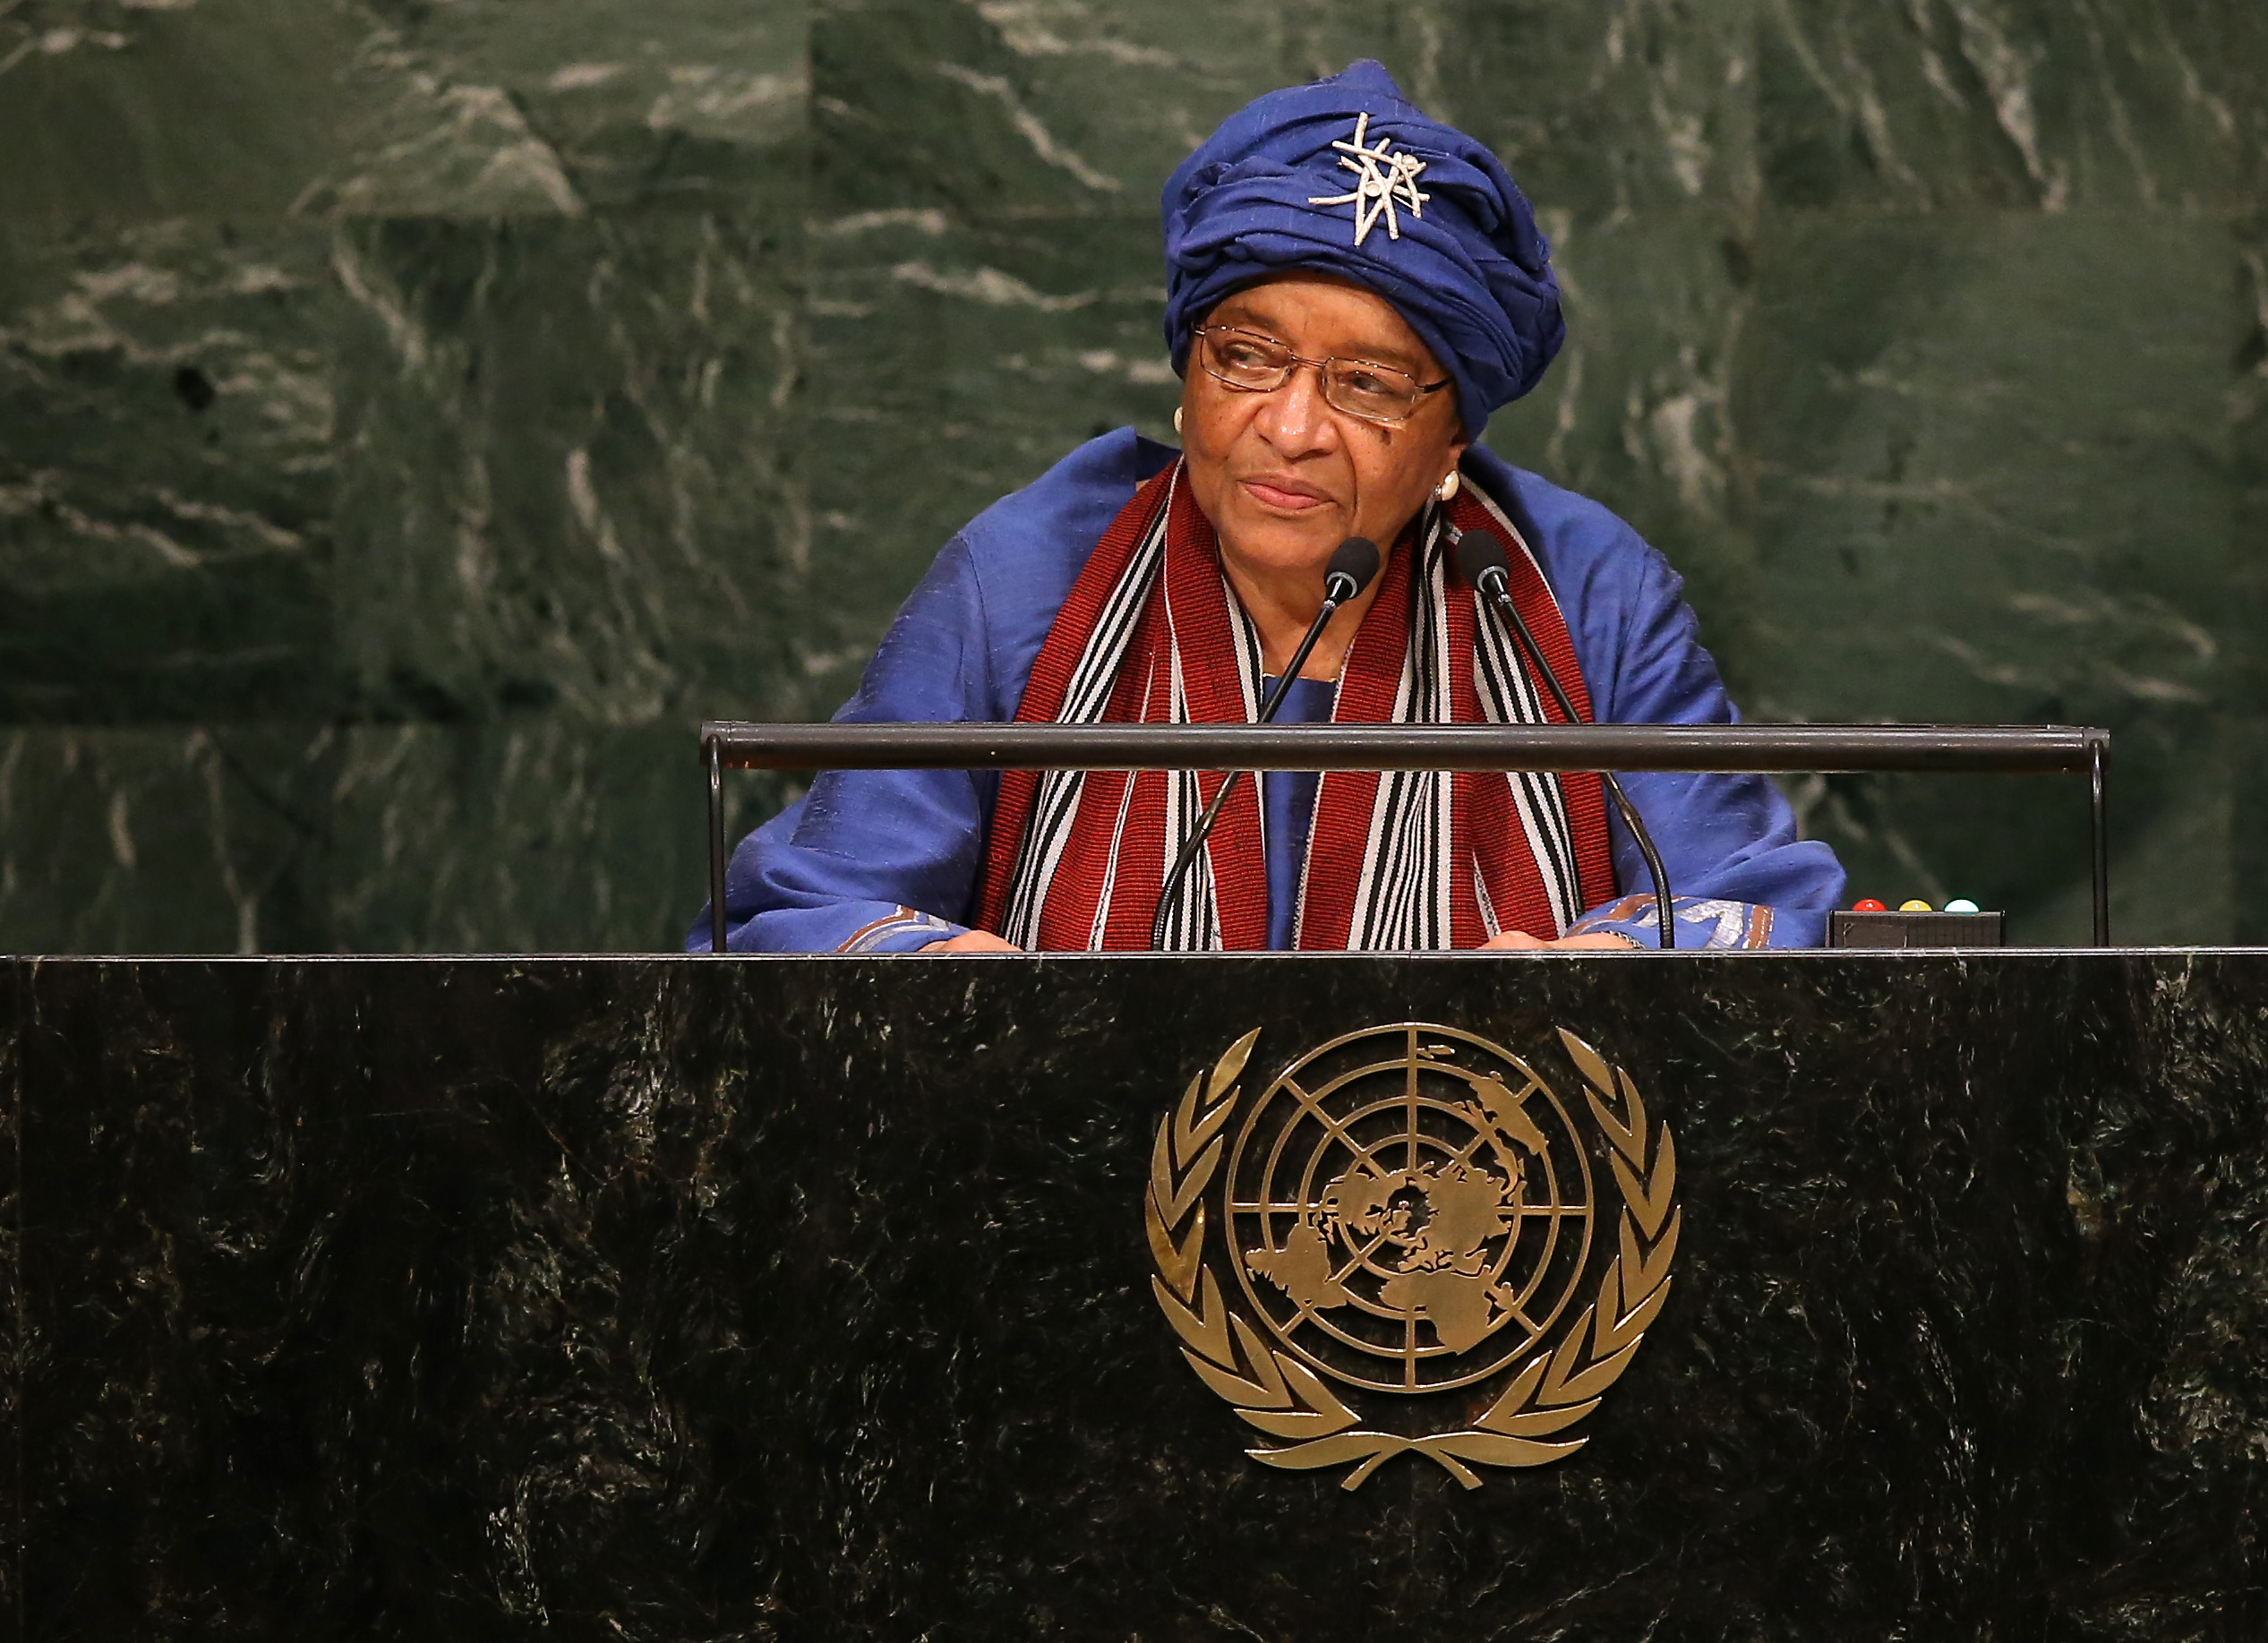 Ellen Johnson Sirleaf, President of Liberia, addresses the General Assembly of the United Nations in New York City on Sept. 29, 2015. (John Moore—Getty Images)